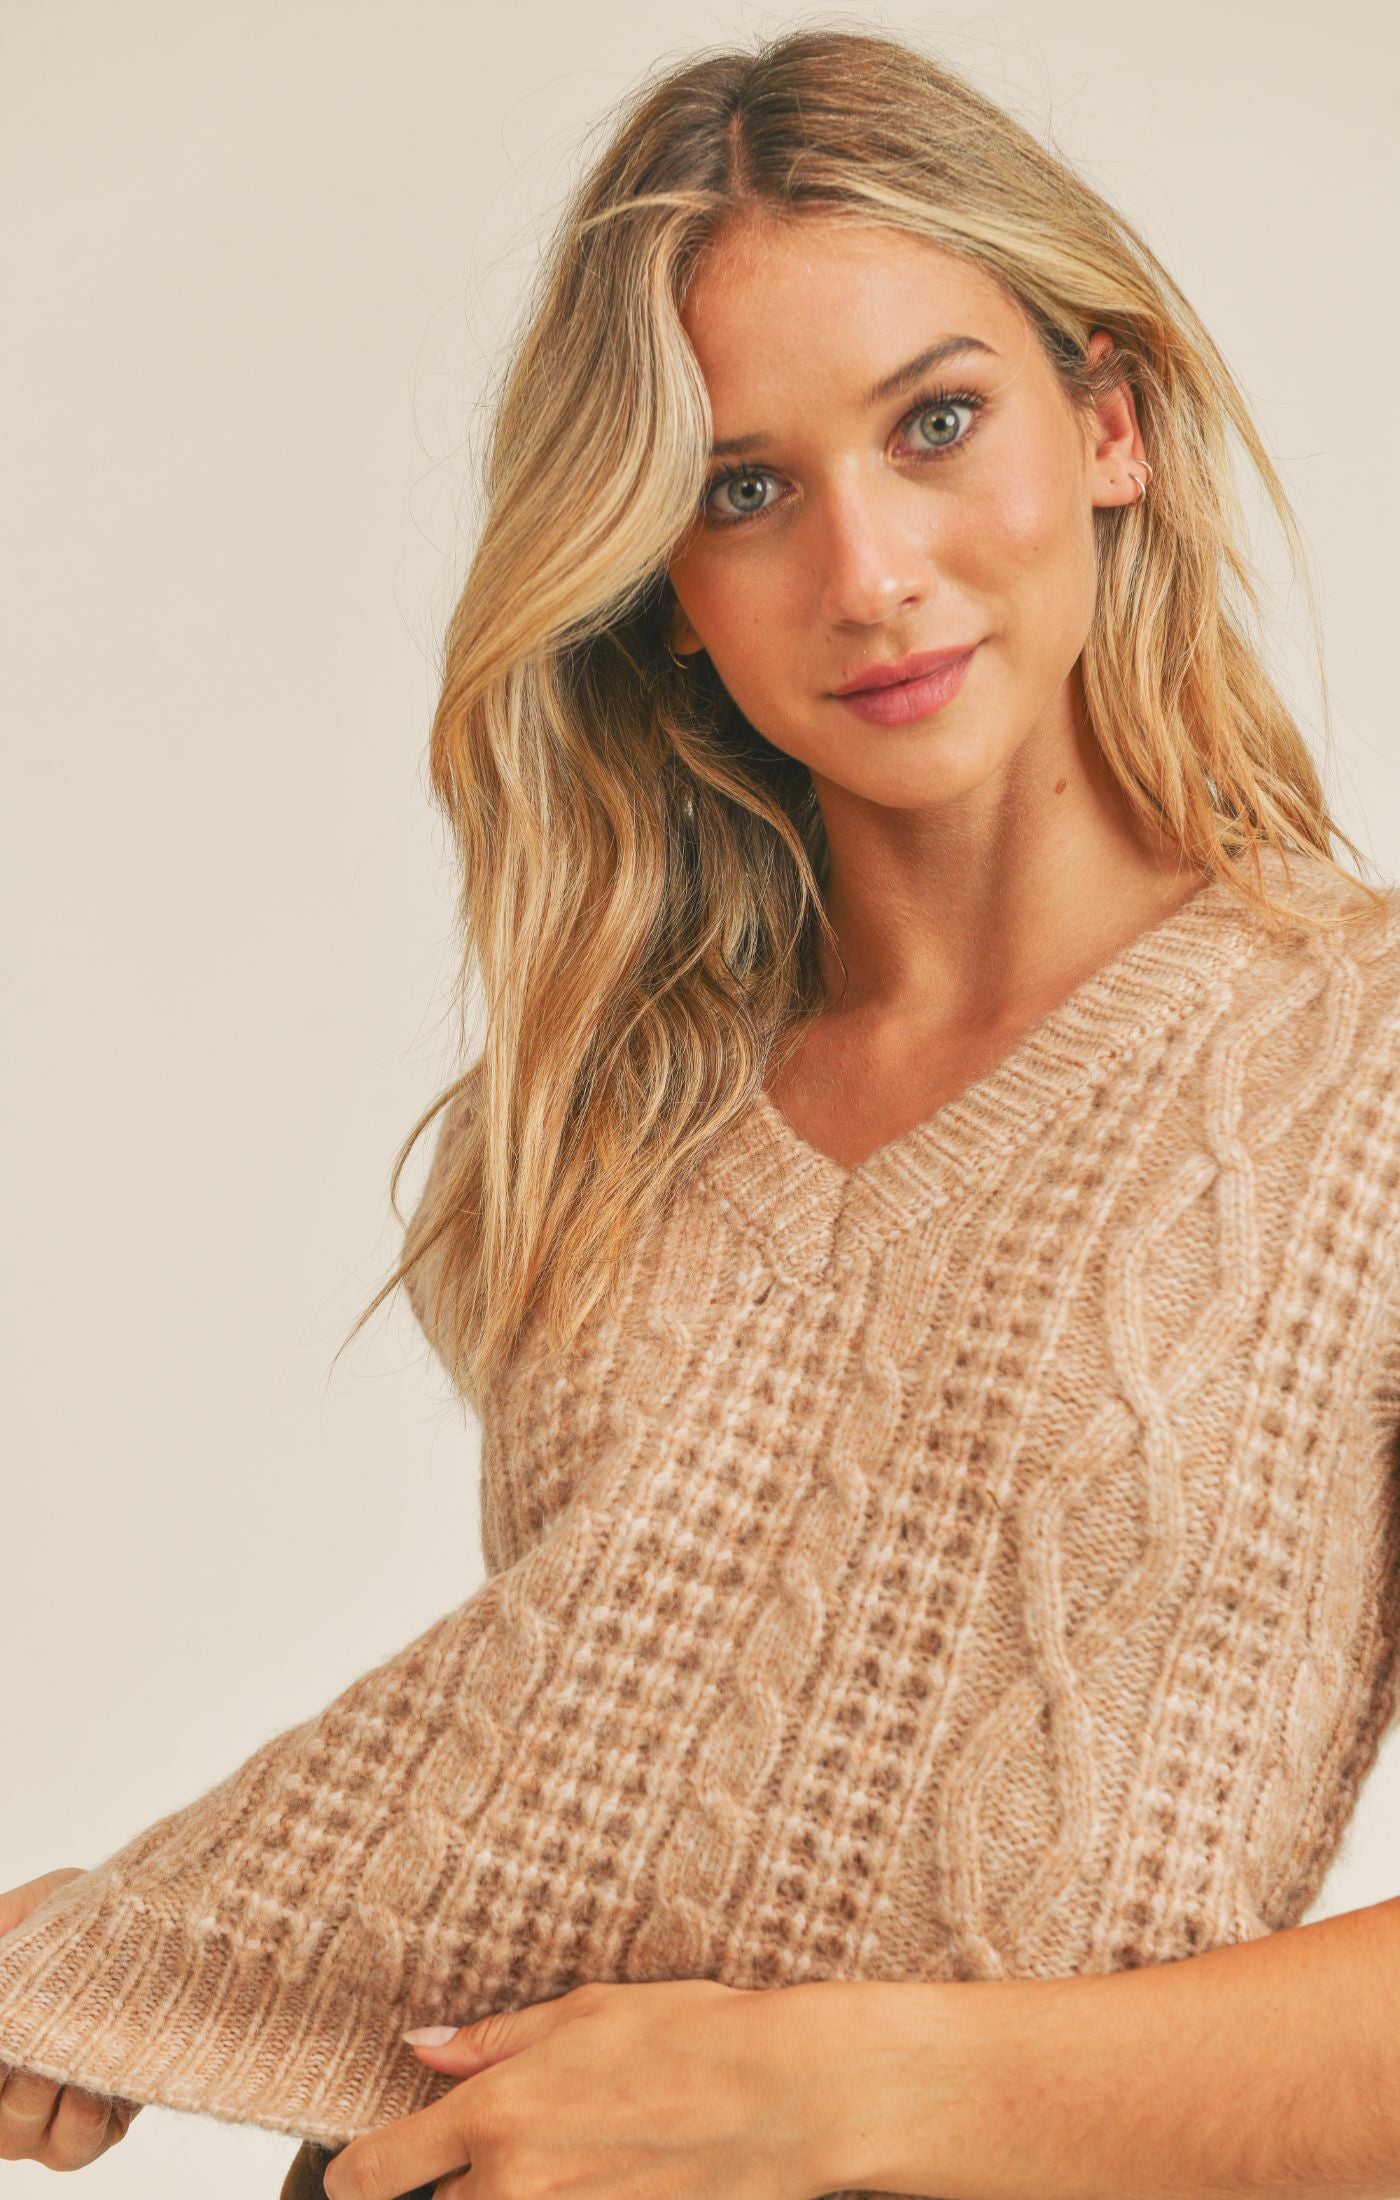 Taupe Best Day Sweater Vest